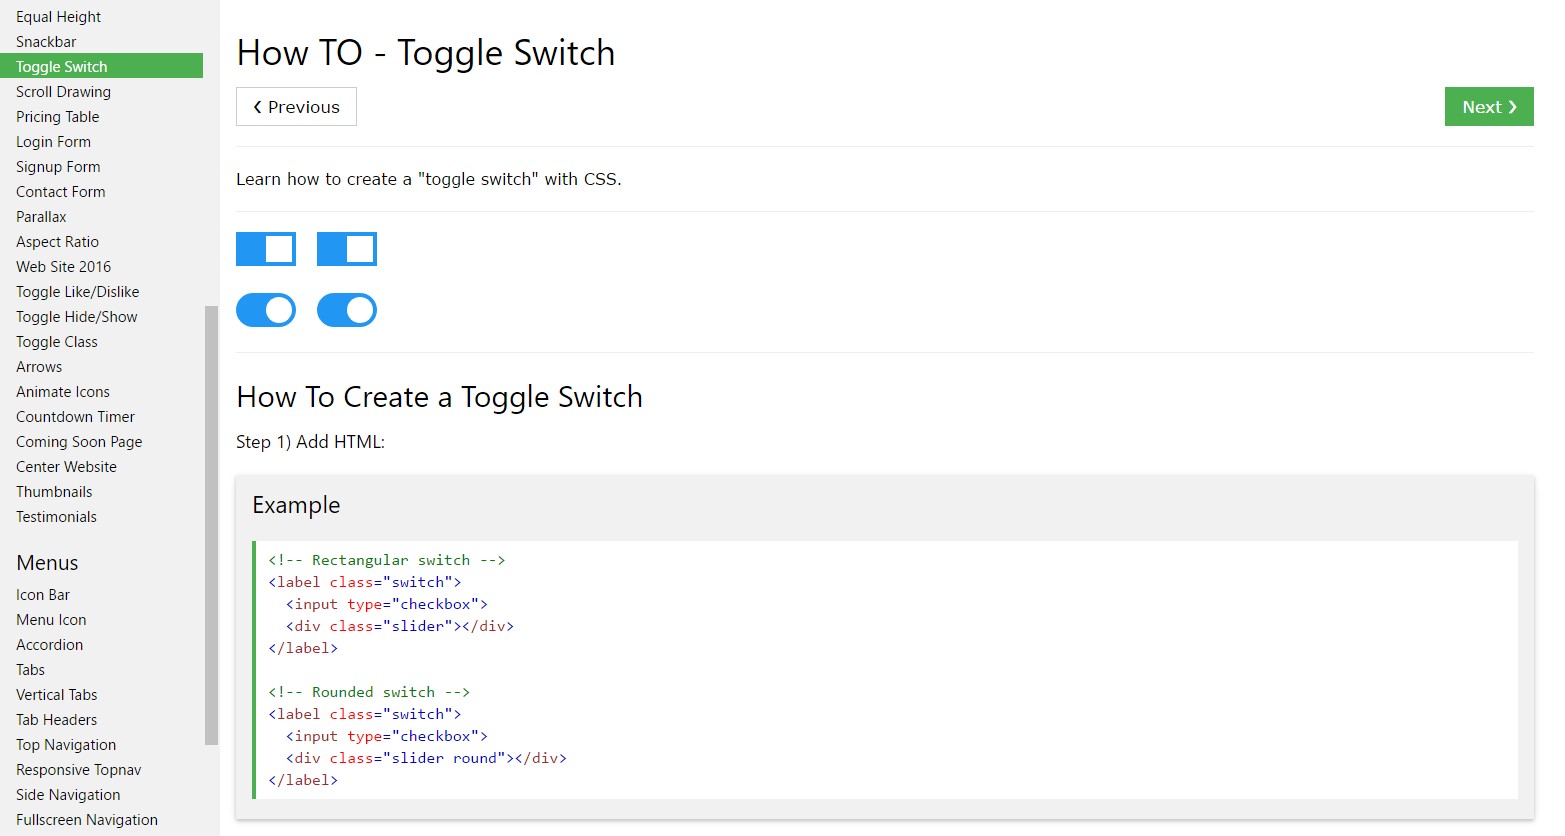  Tips on how to create Toggle Switch